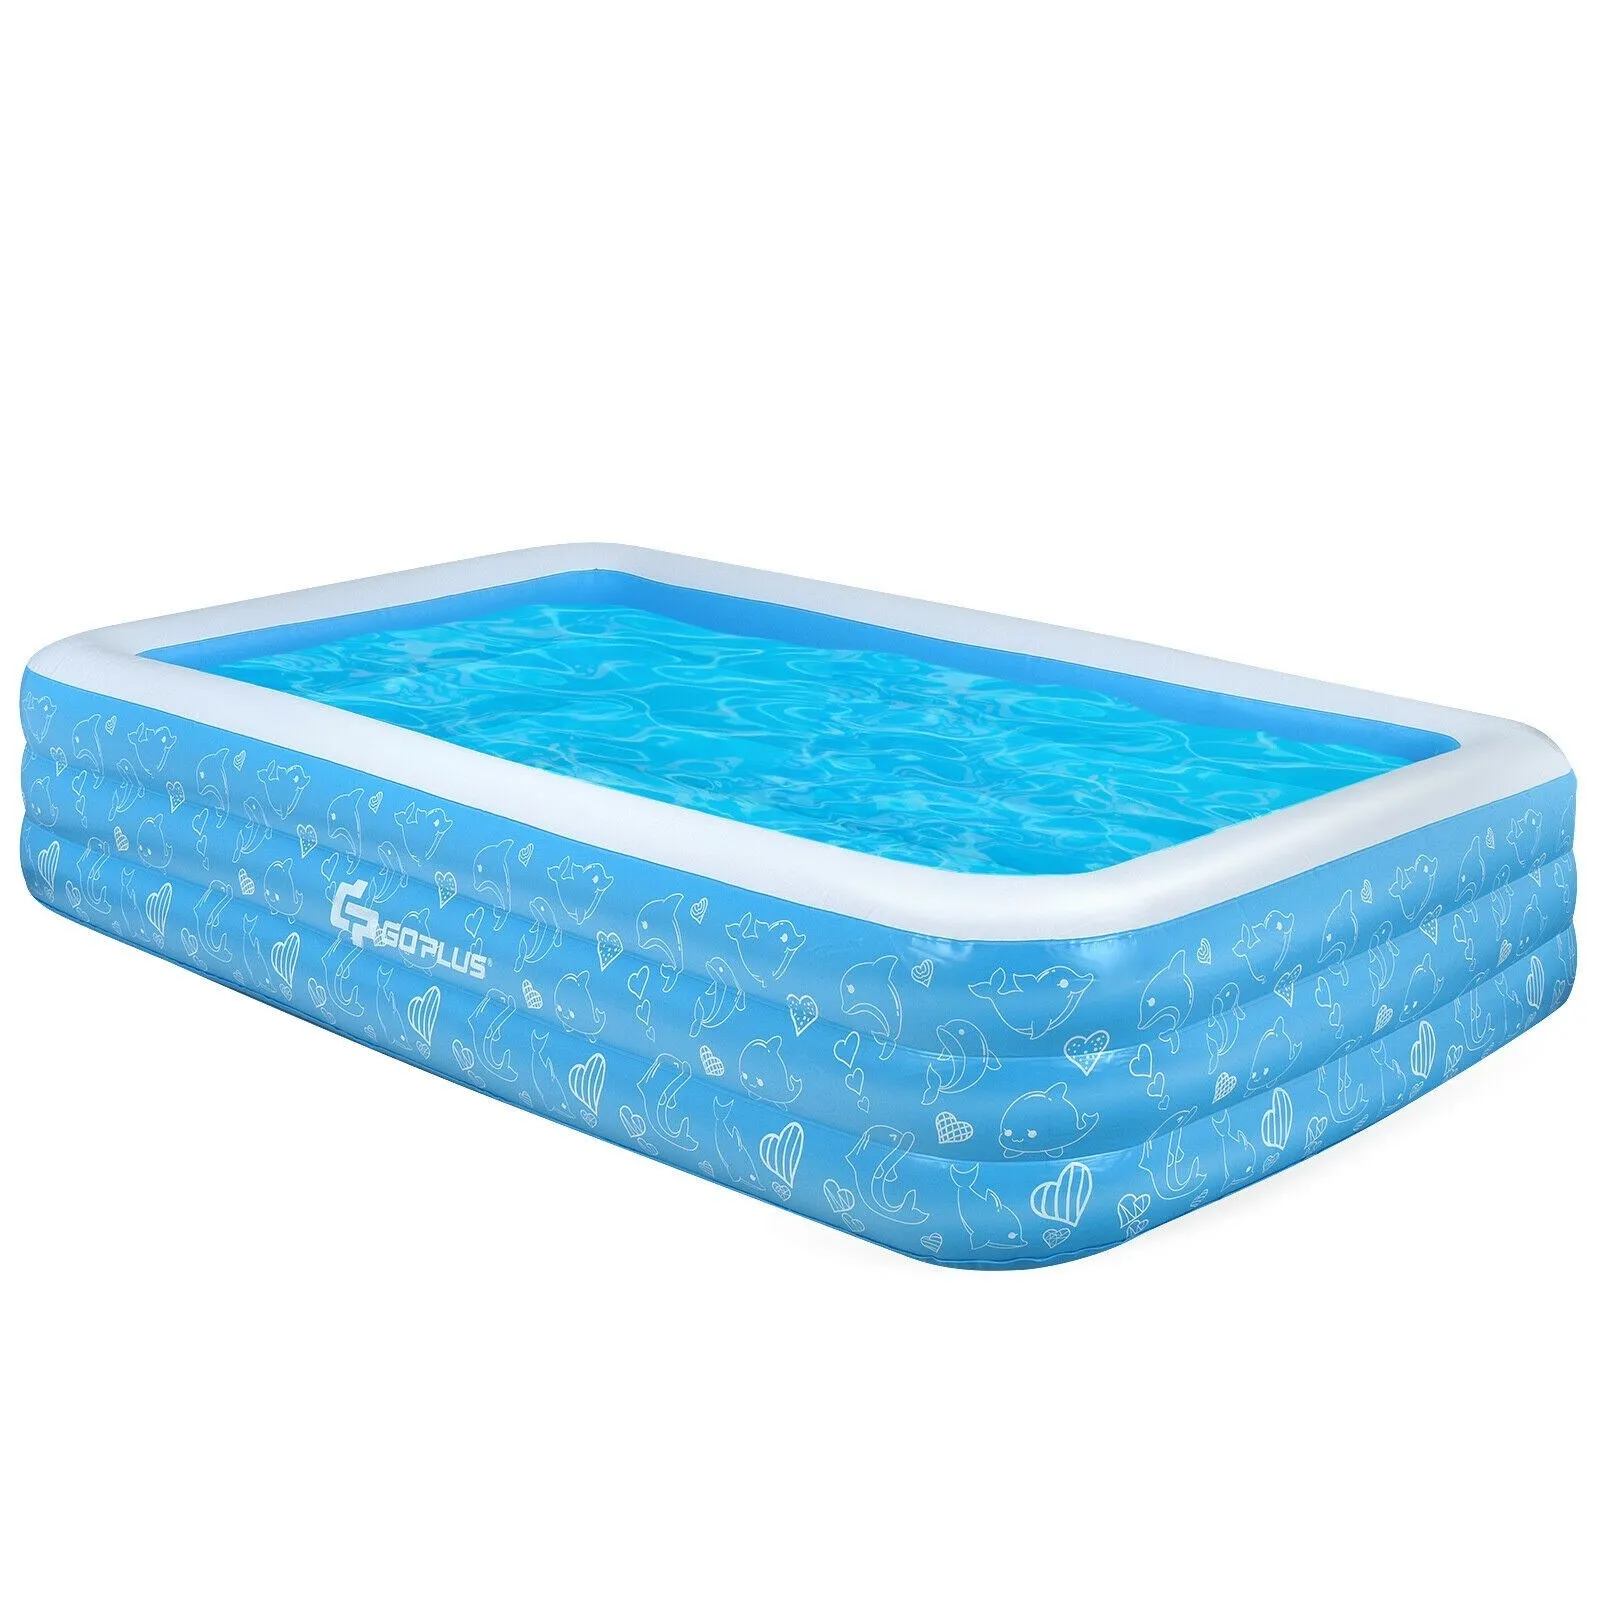 Inflatable Swimming Pool Family Full-Sized Above Ground PVC Swimming Pools Outdoor Backyard Lounge Pool[US-Stock]